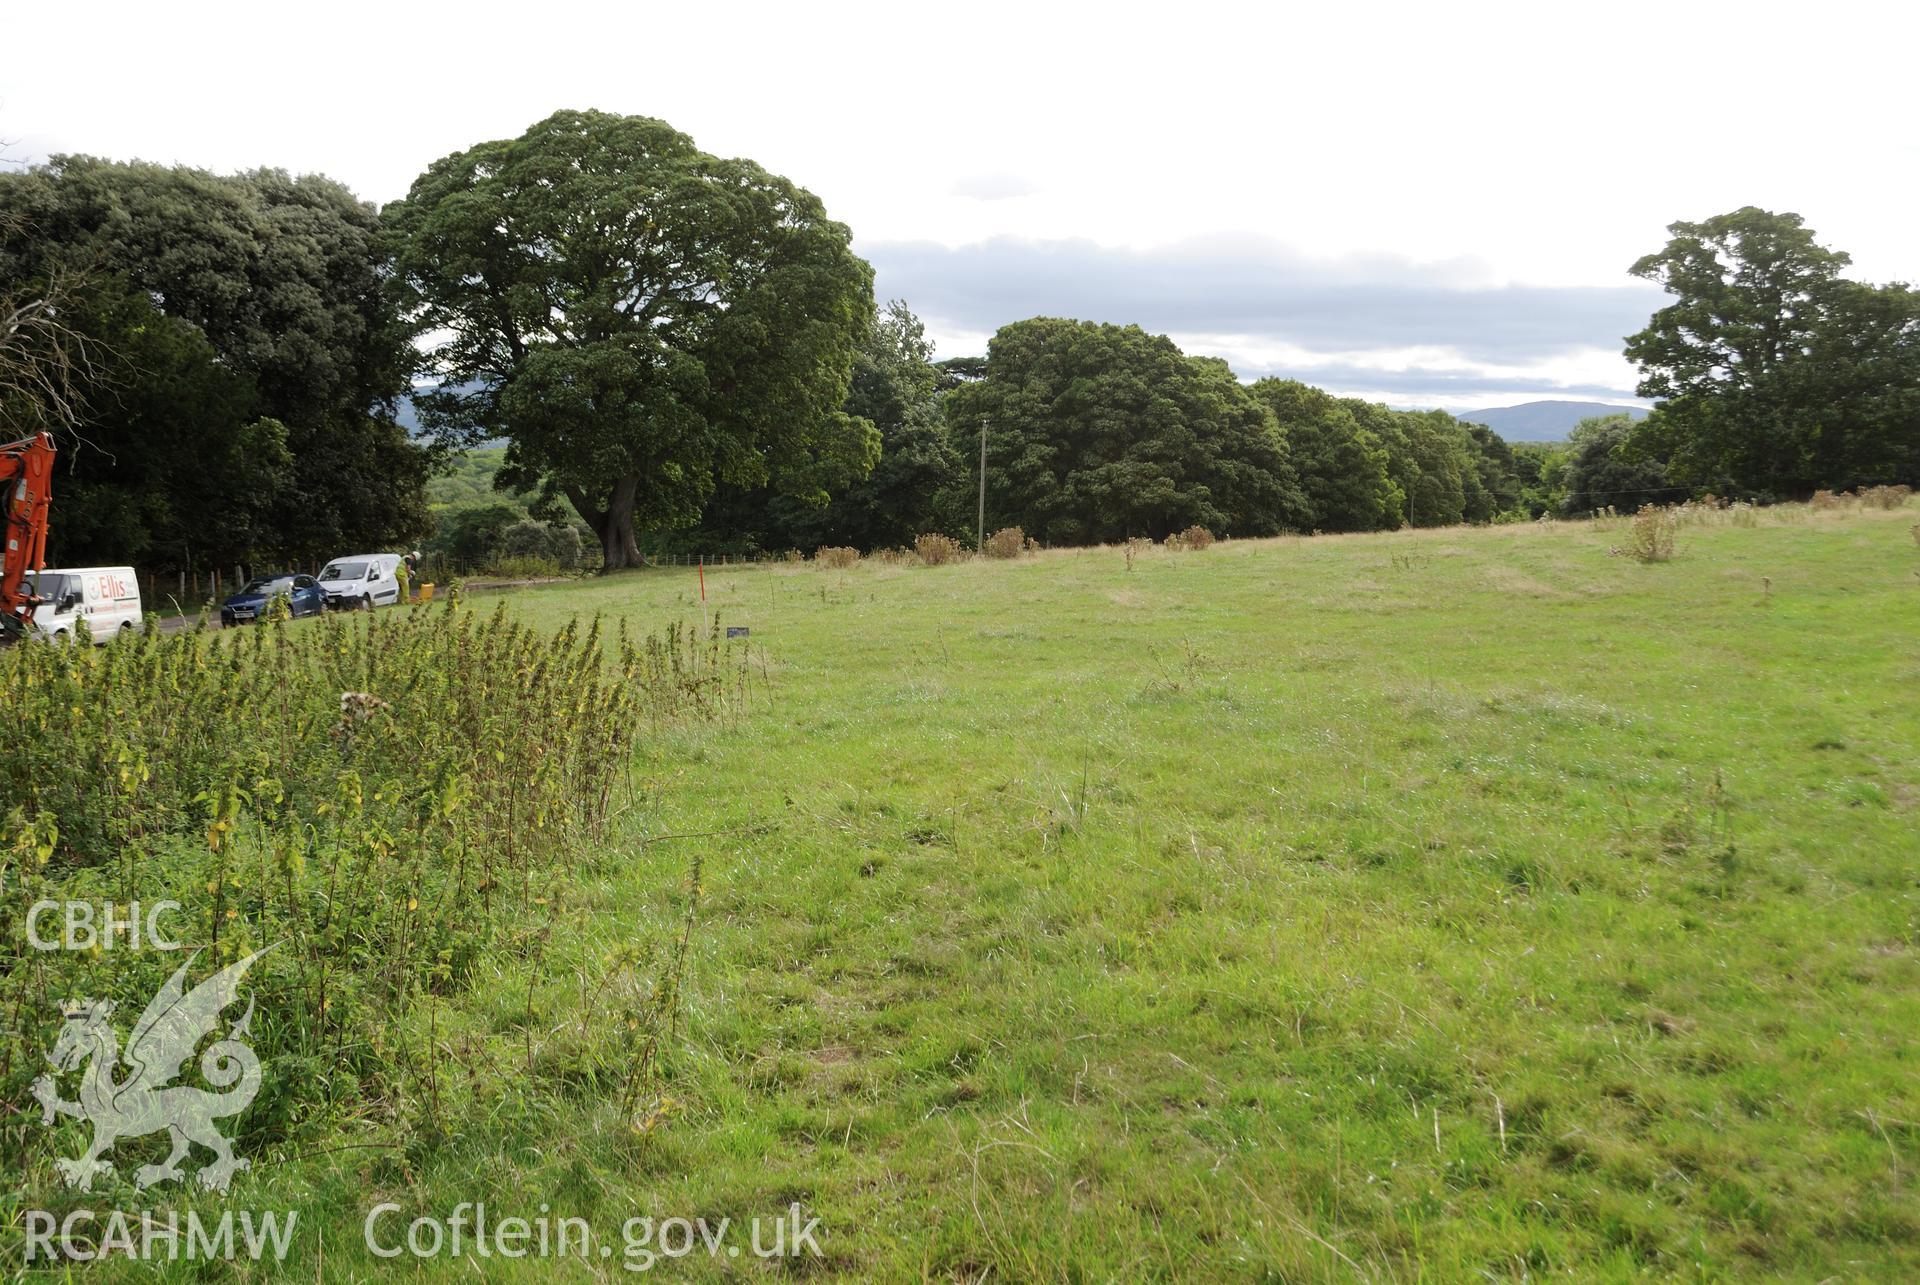 Wide angle view from west of evaluation area pre-excavation, with garden boundary wall to the north. Photographed during archaeological evaluation of Kinmel Park, Abergele, conducted by Gwynedd Archaeological Trust on 22nd August 2018. Project no. 2571.